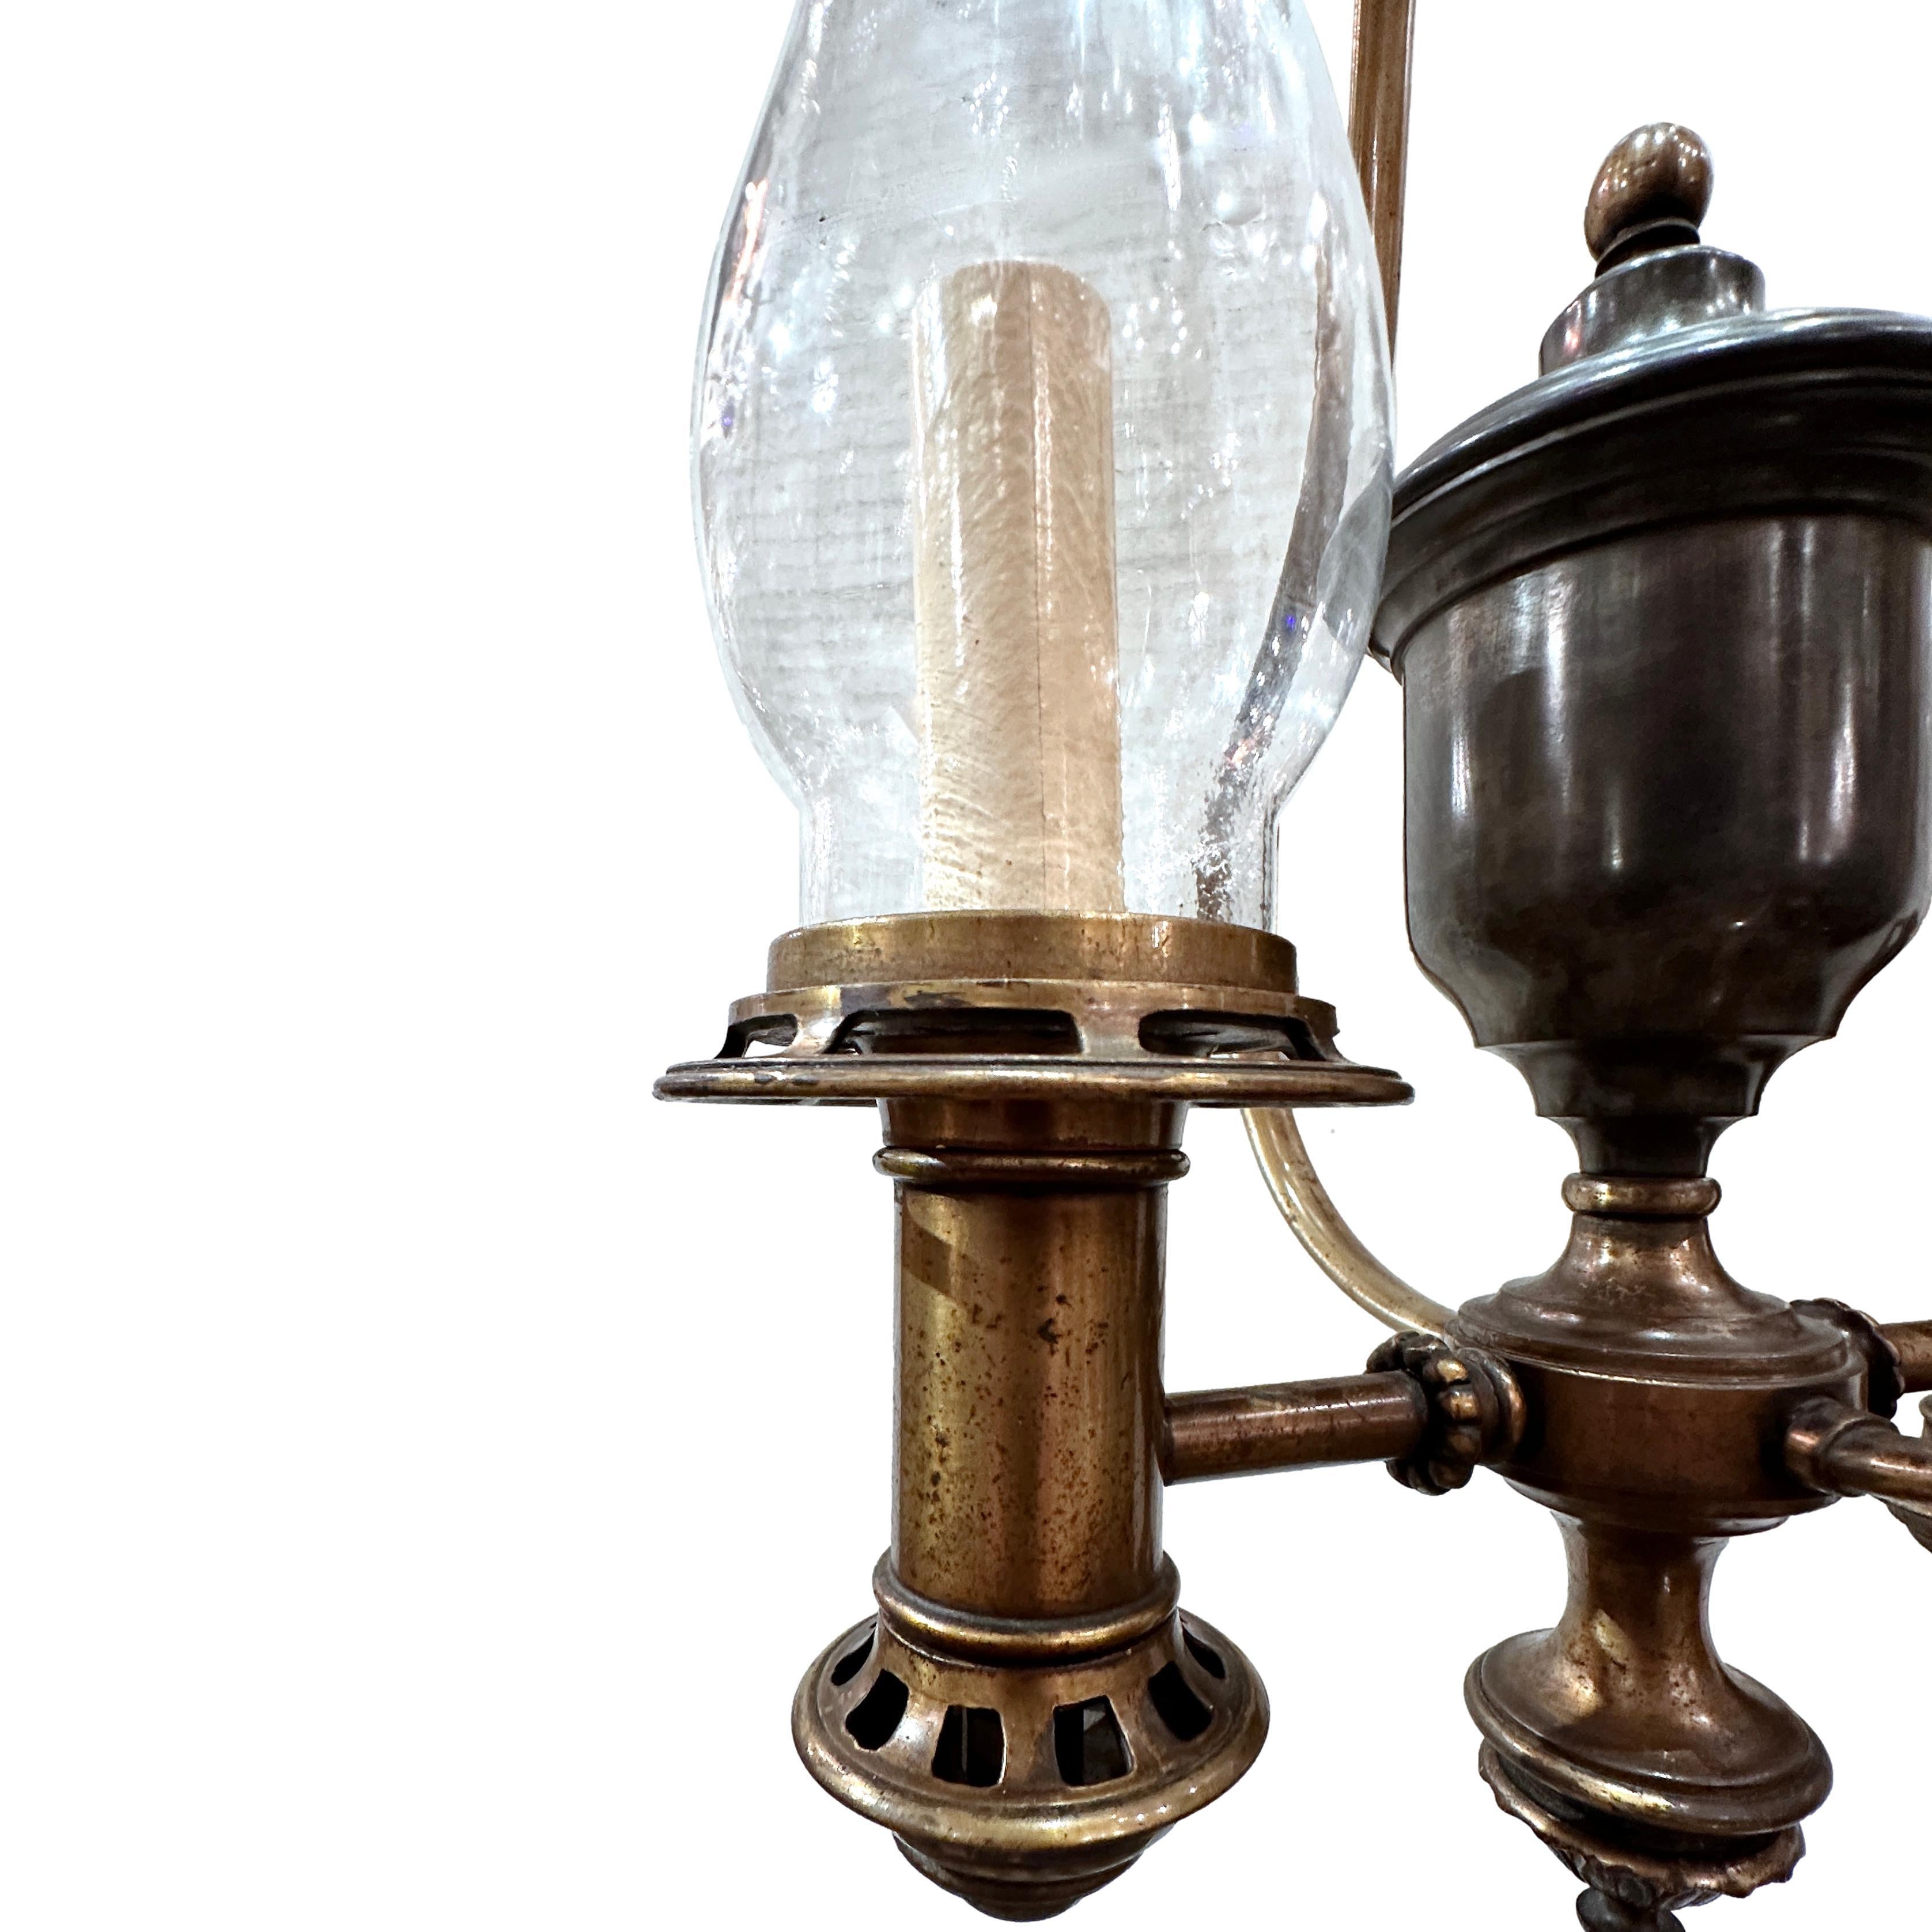 Pair of American circa 1930's bronze and pewter double light nautical pendant light fixtures with clear glass hurricanes. Sold individually.

Measurements:
Minimum drop: 20